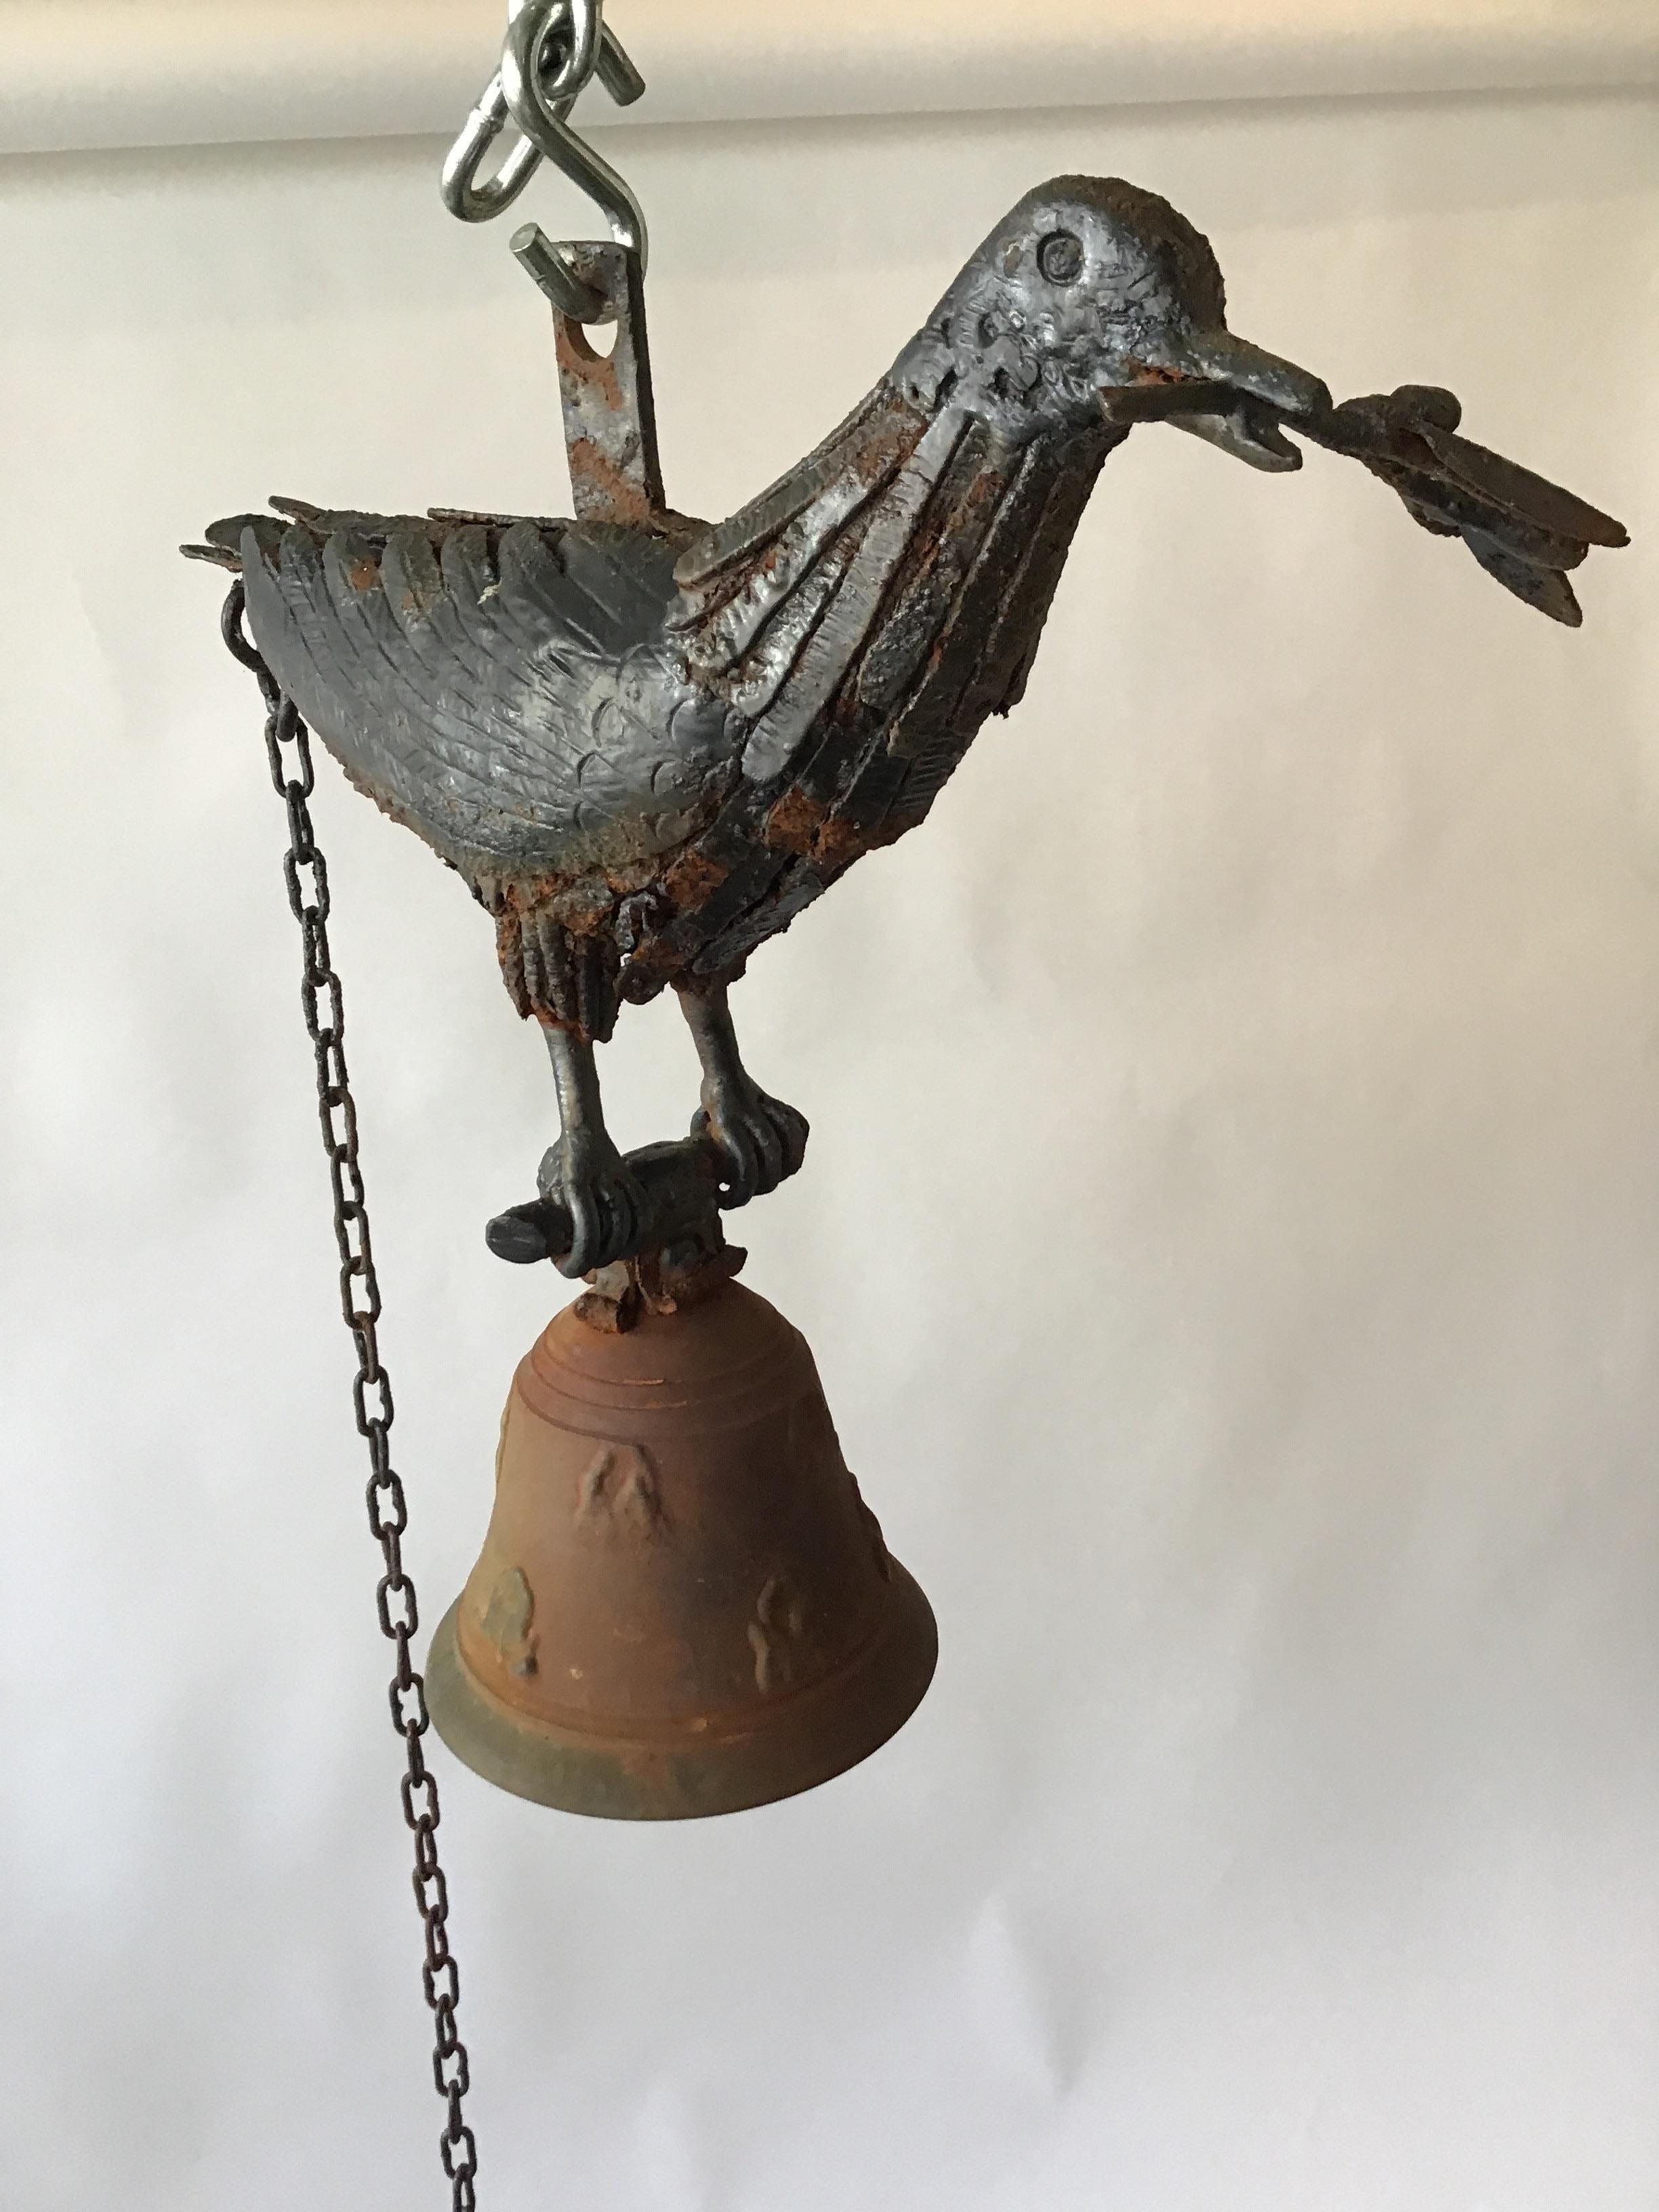 One of a kind, artisan made iron dove with olive branch bell. Pull the chain, and the bell chimes. From an artist’s estate in Westchester, NY.